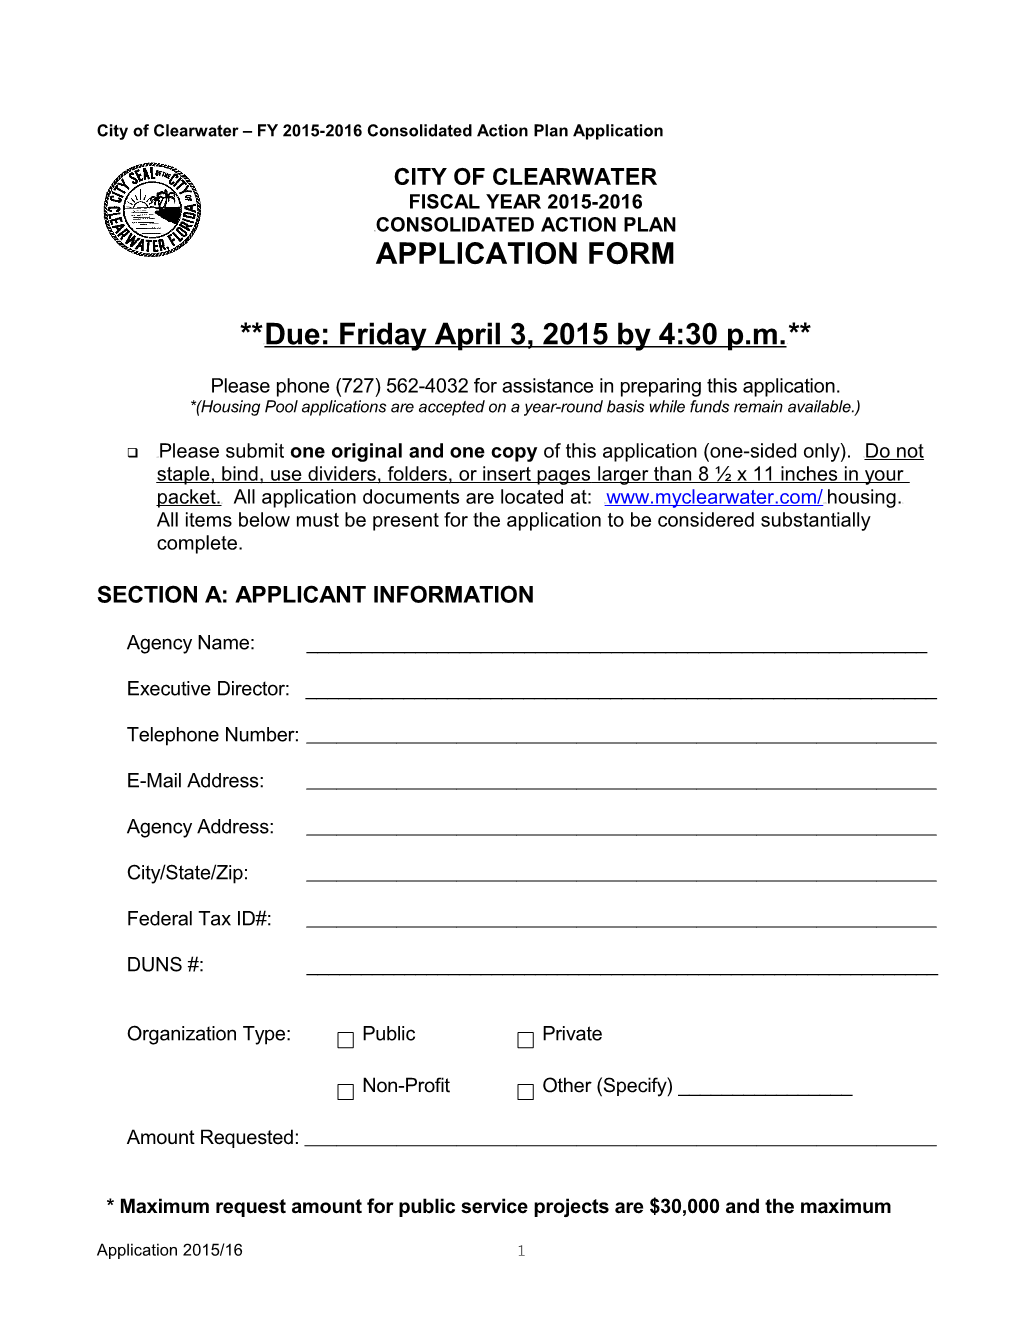 City of Clearwater FY 2015-2016 Consolidated Action Plan Application